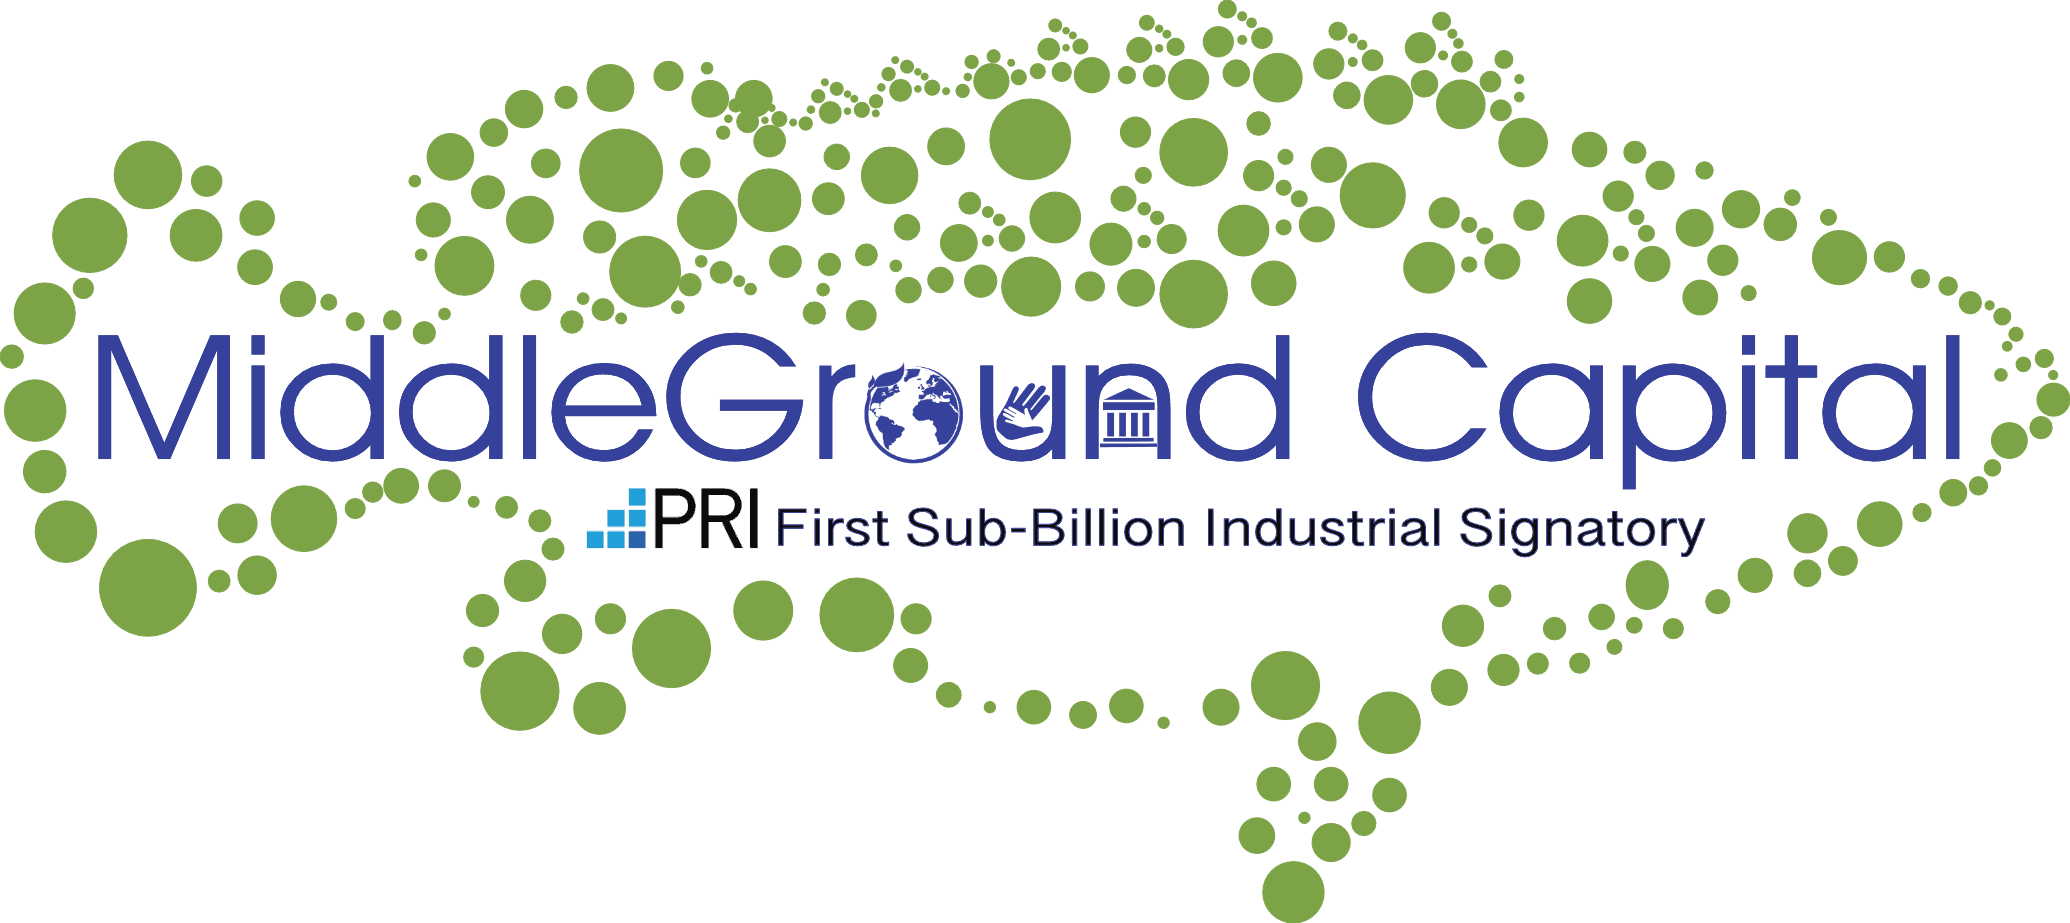 The Middle Ground Capital Group